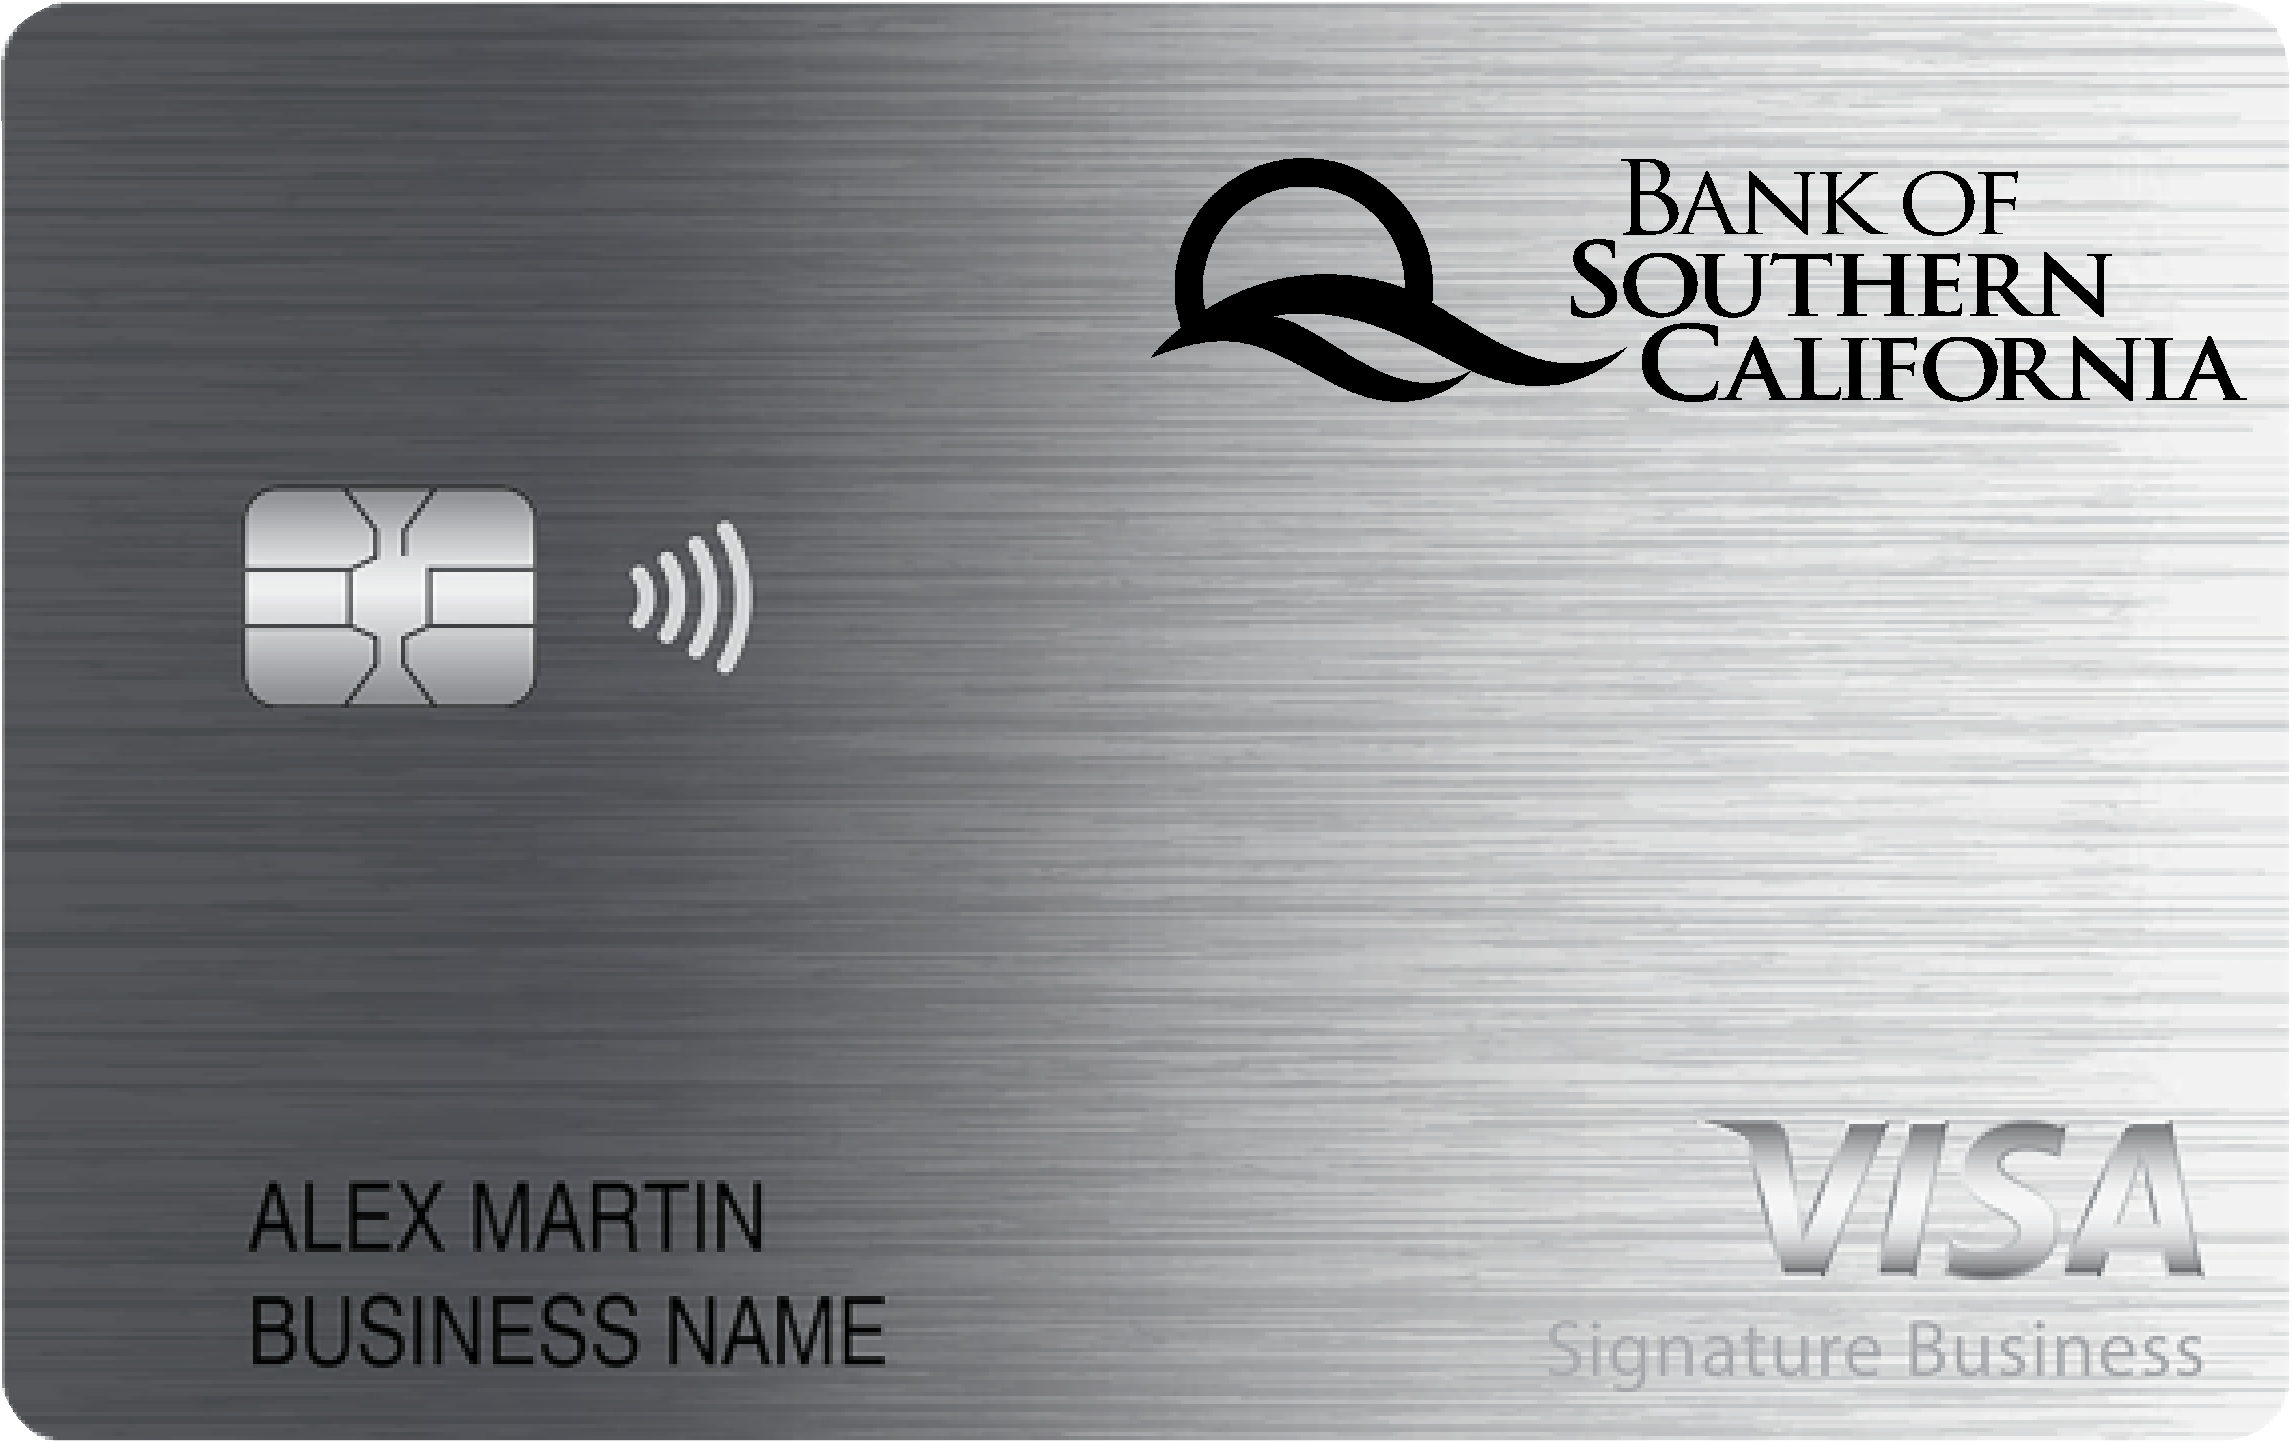 Bank of Southern California Smart Business Rewards Card